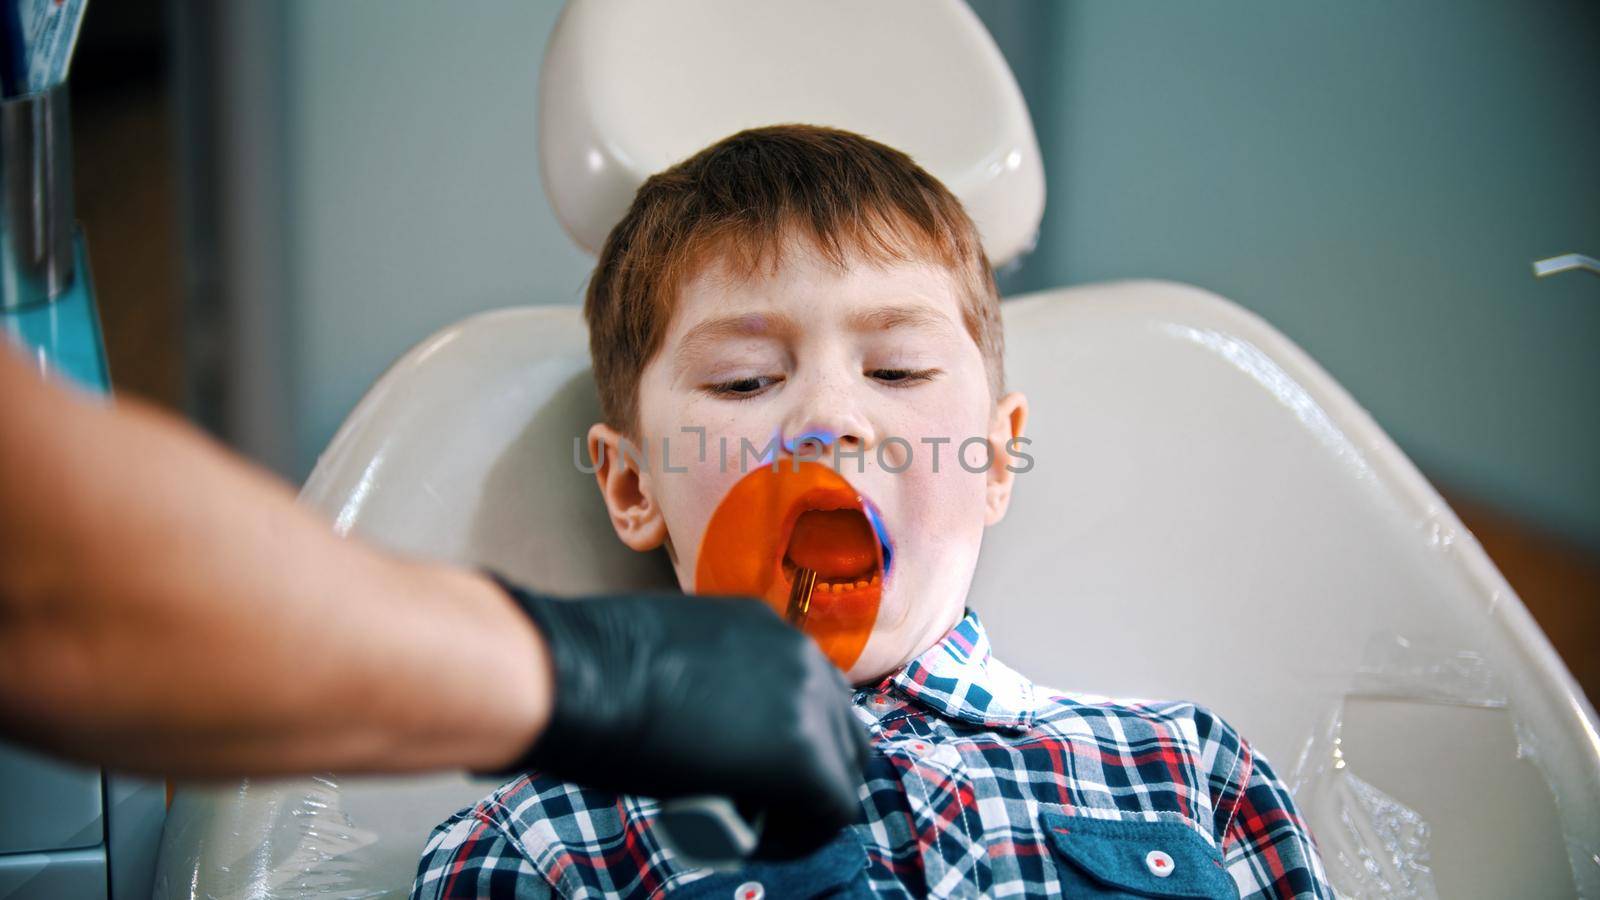 A little boy having his tooth done - putting the photopolymer lamp in the mouth by Studia72